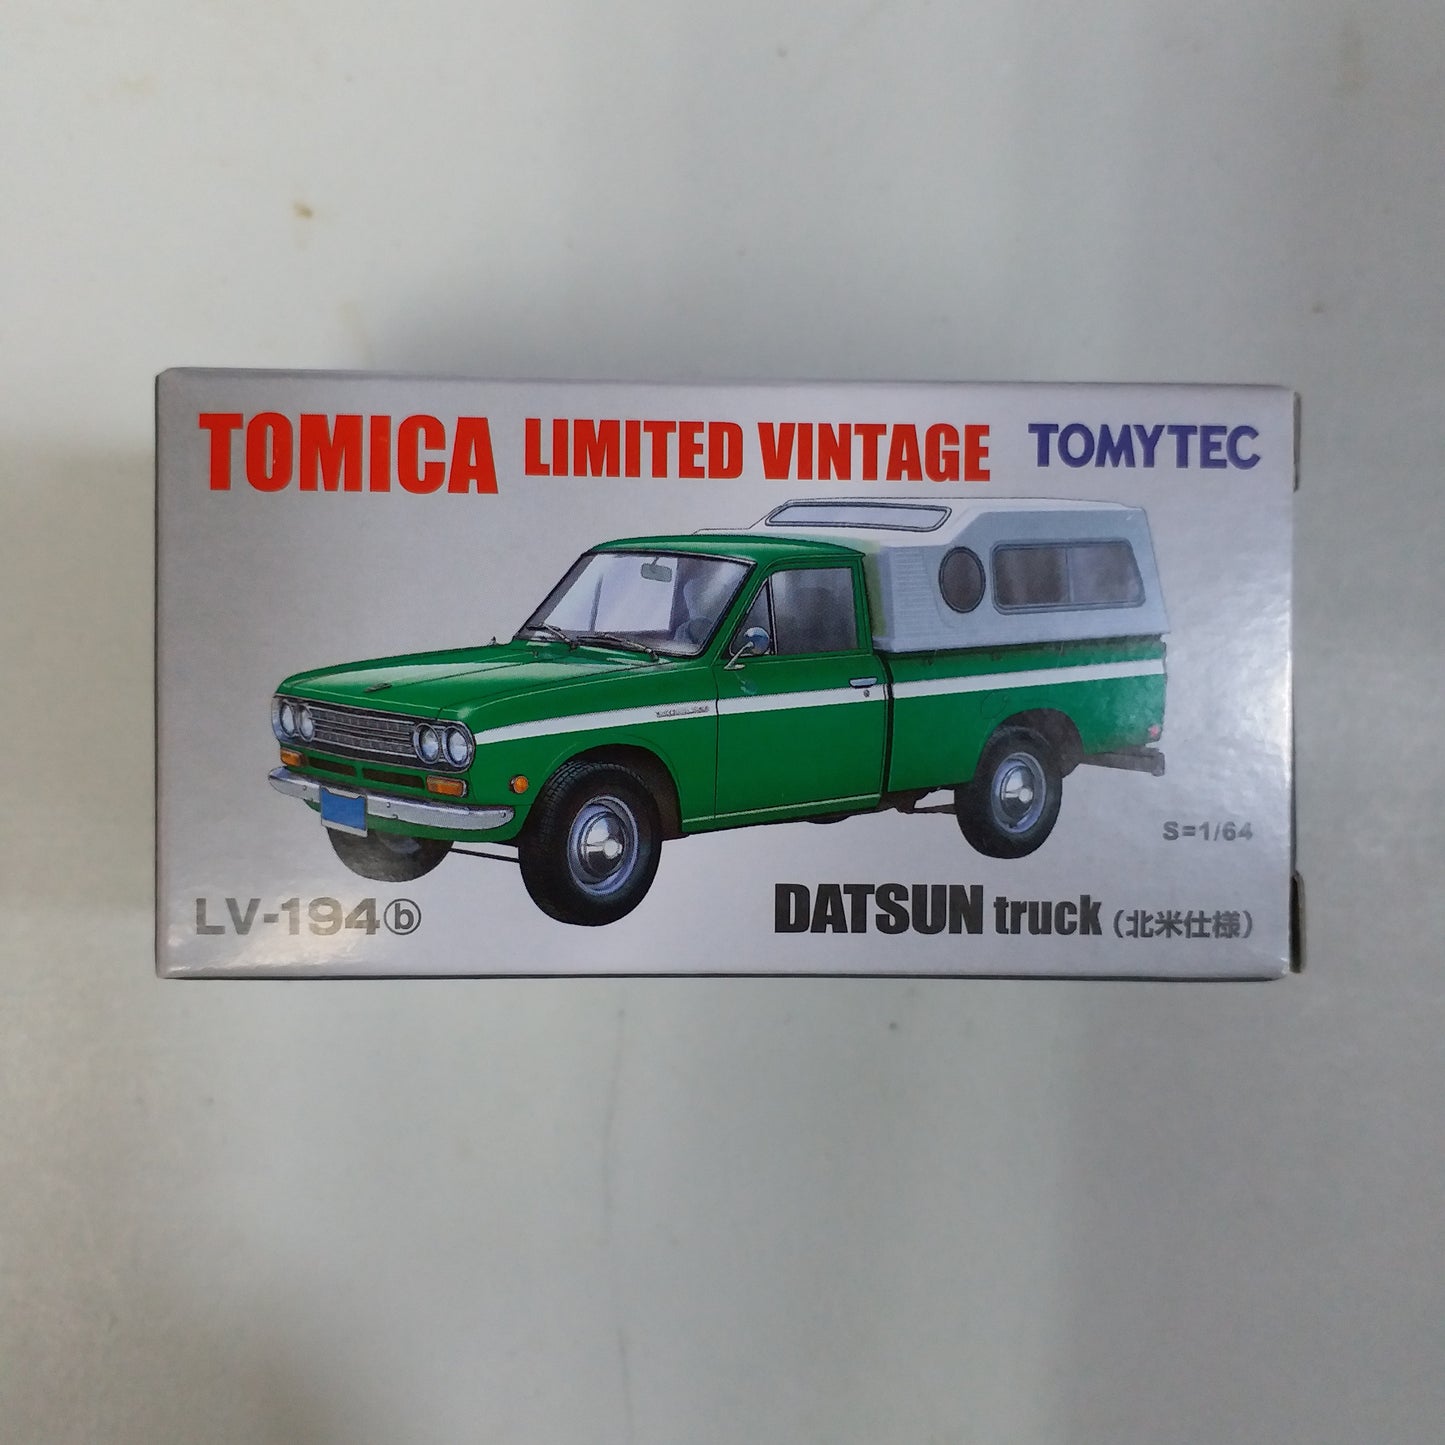 Tomica Limited Vintage LV-194b Datsun Truck North American specification (Green)